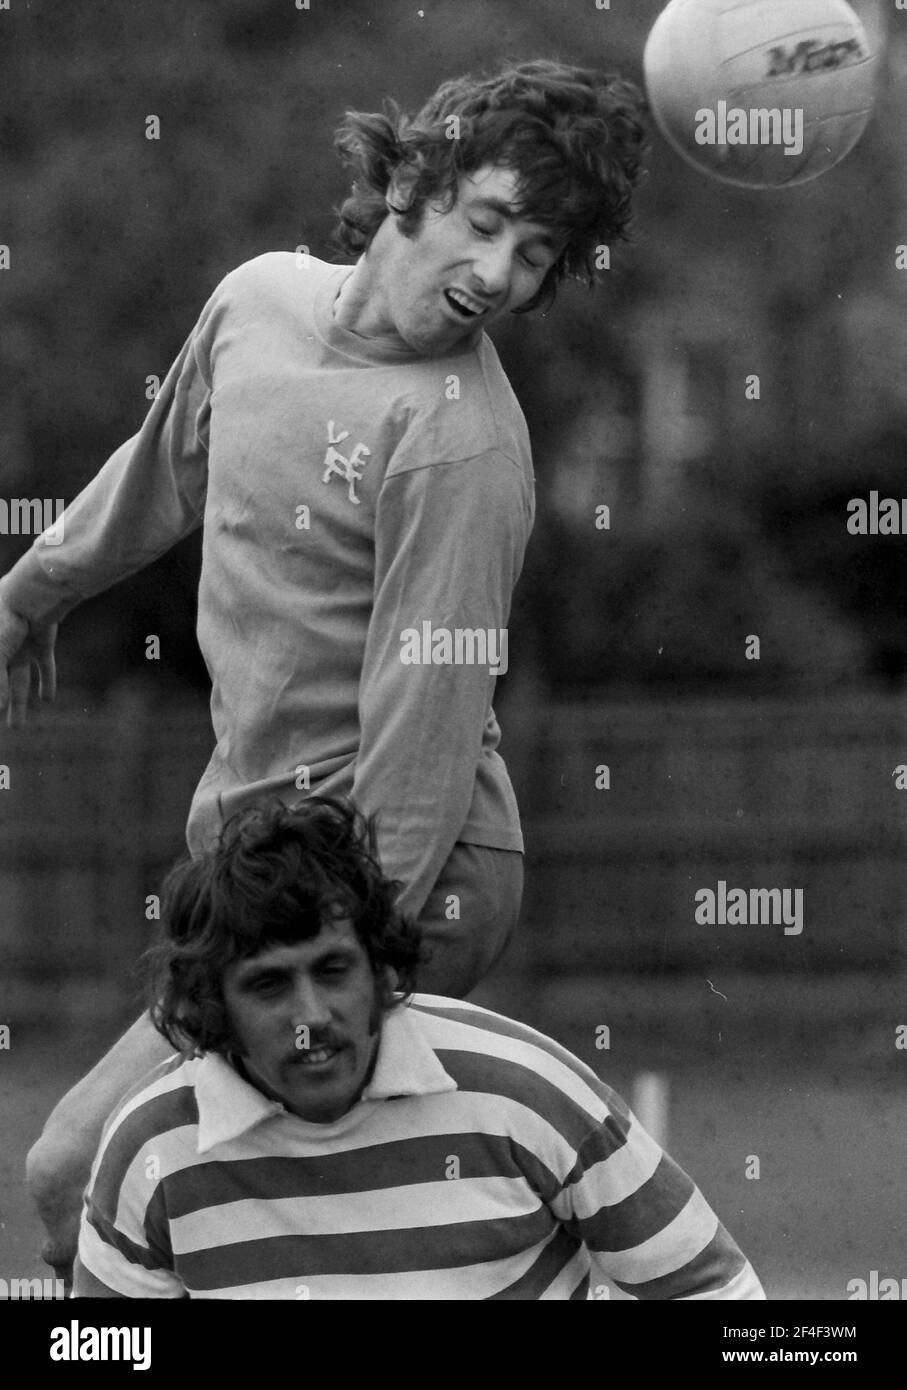 Amateur footballers in the 1970s Stock Photo